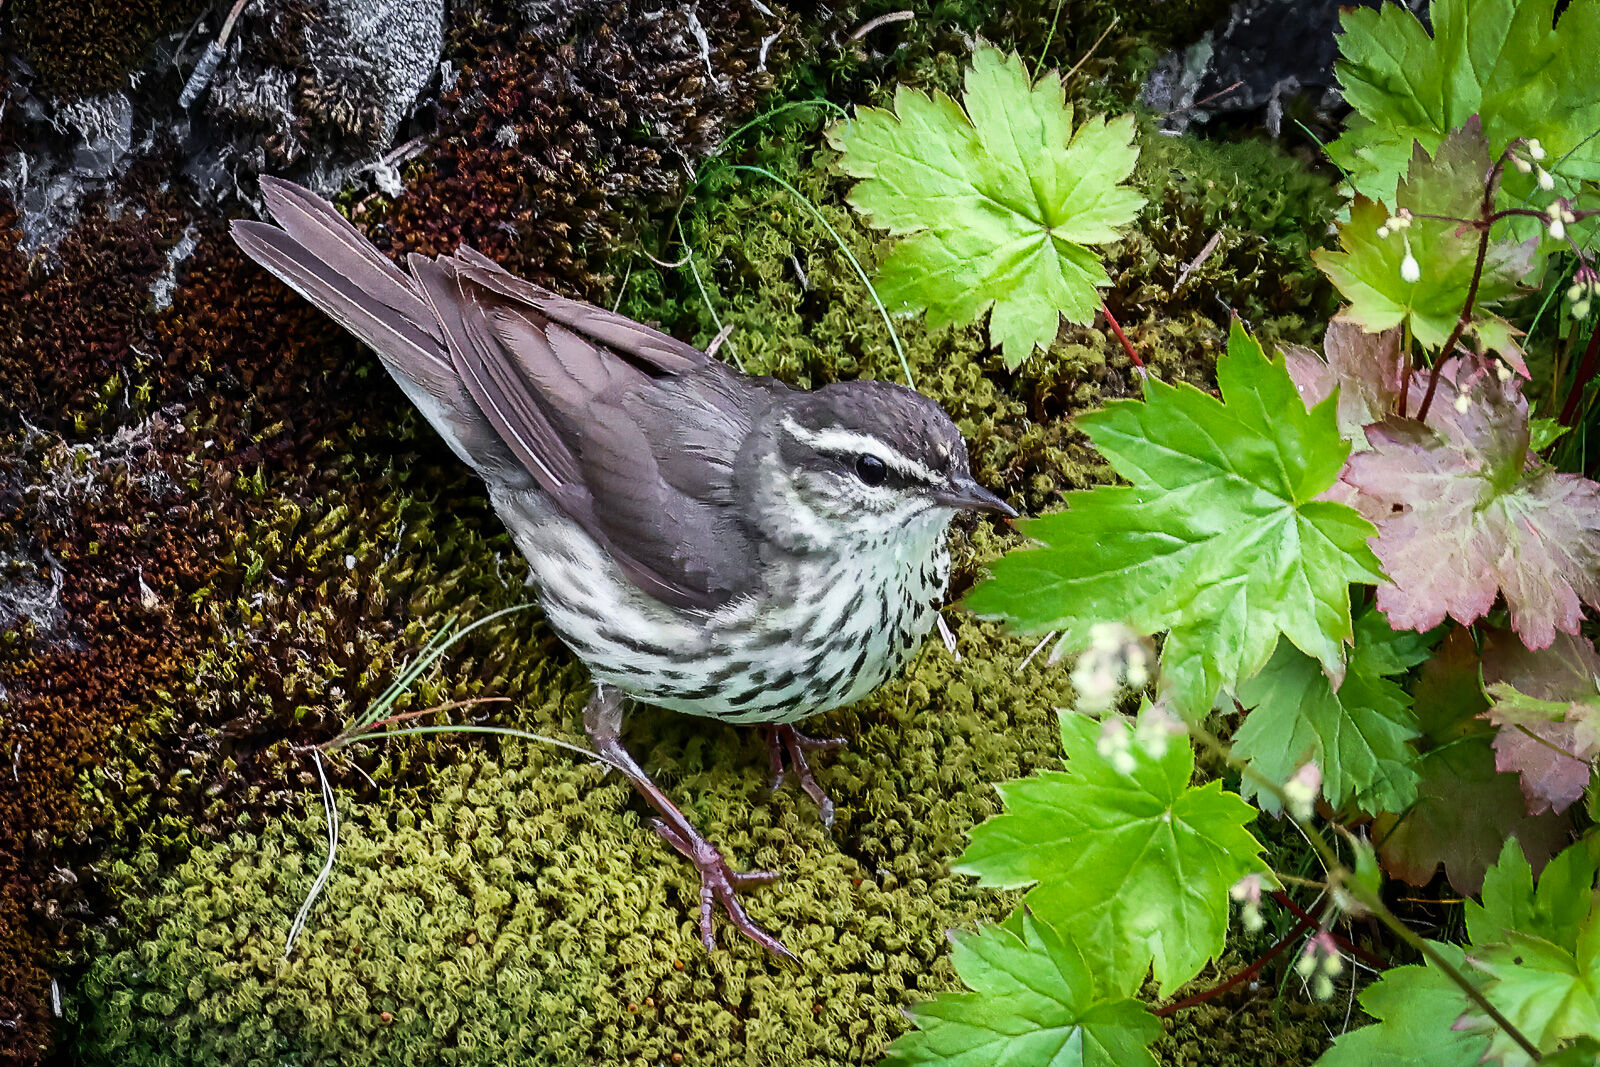 Northern Waterthrush next the to the water's edge on some lovely mosses.